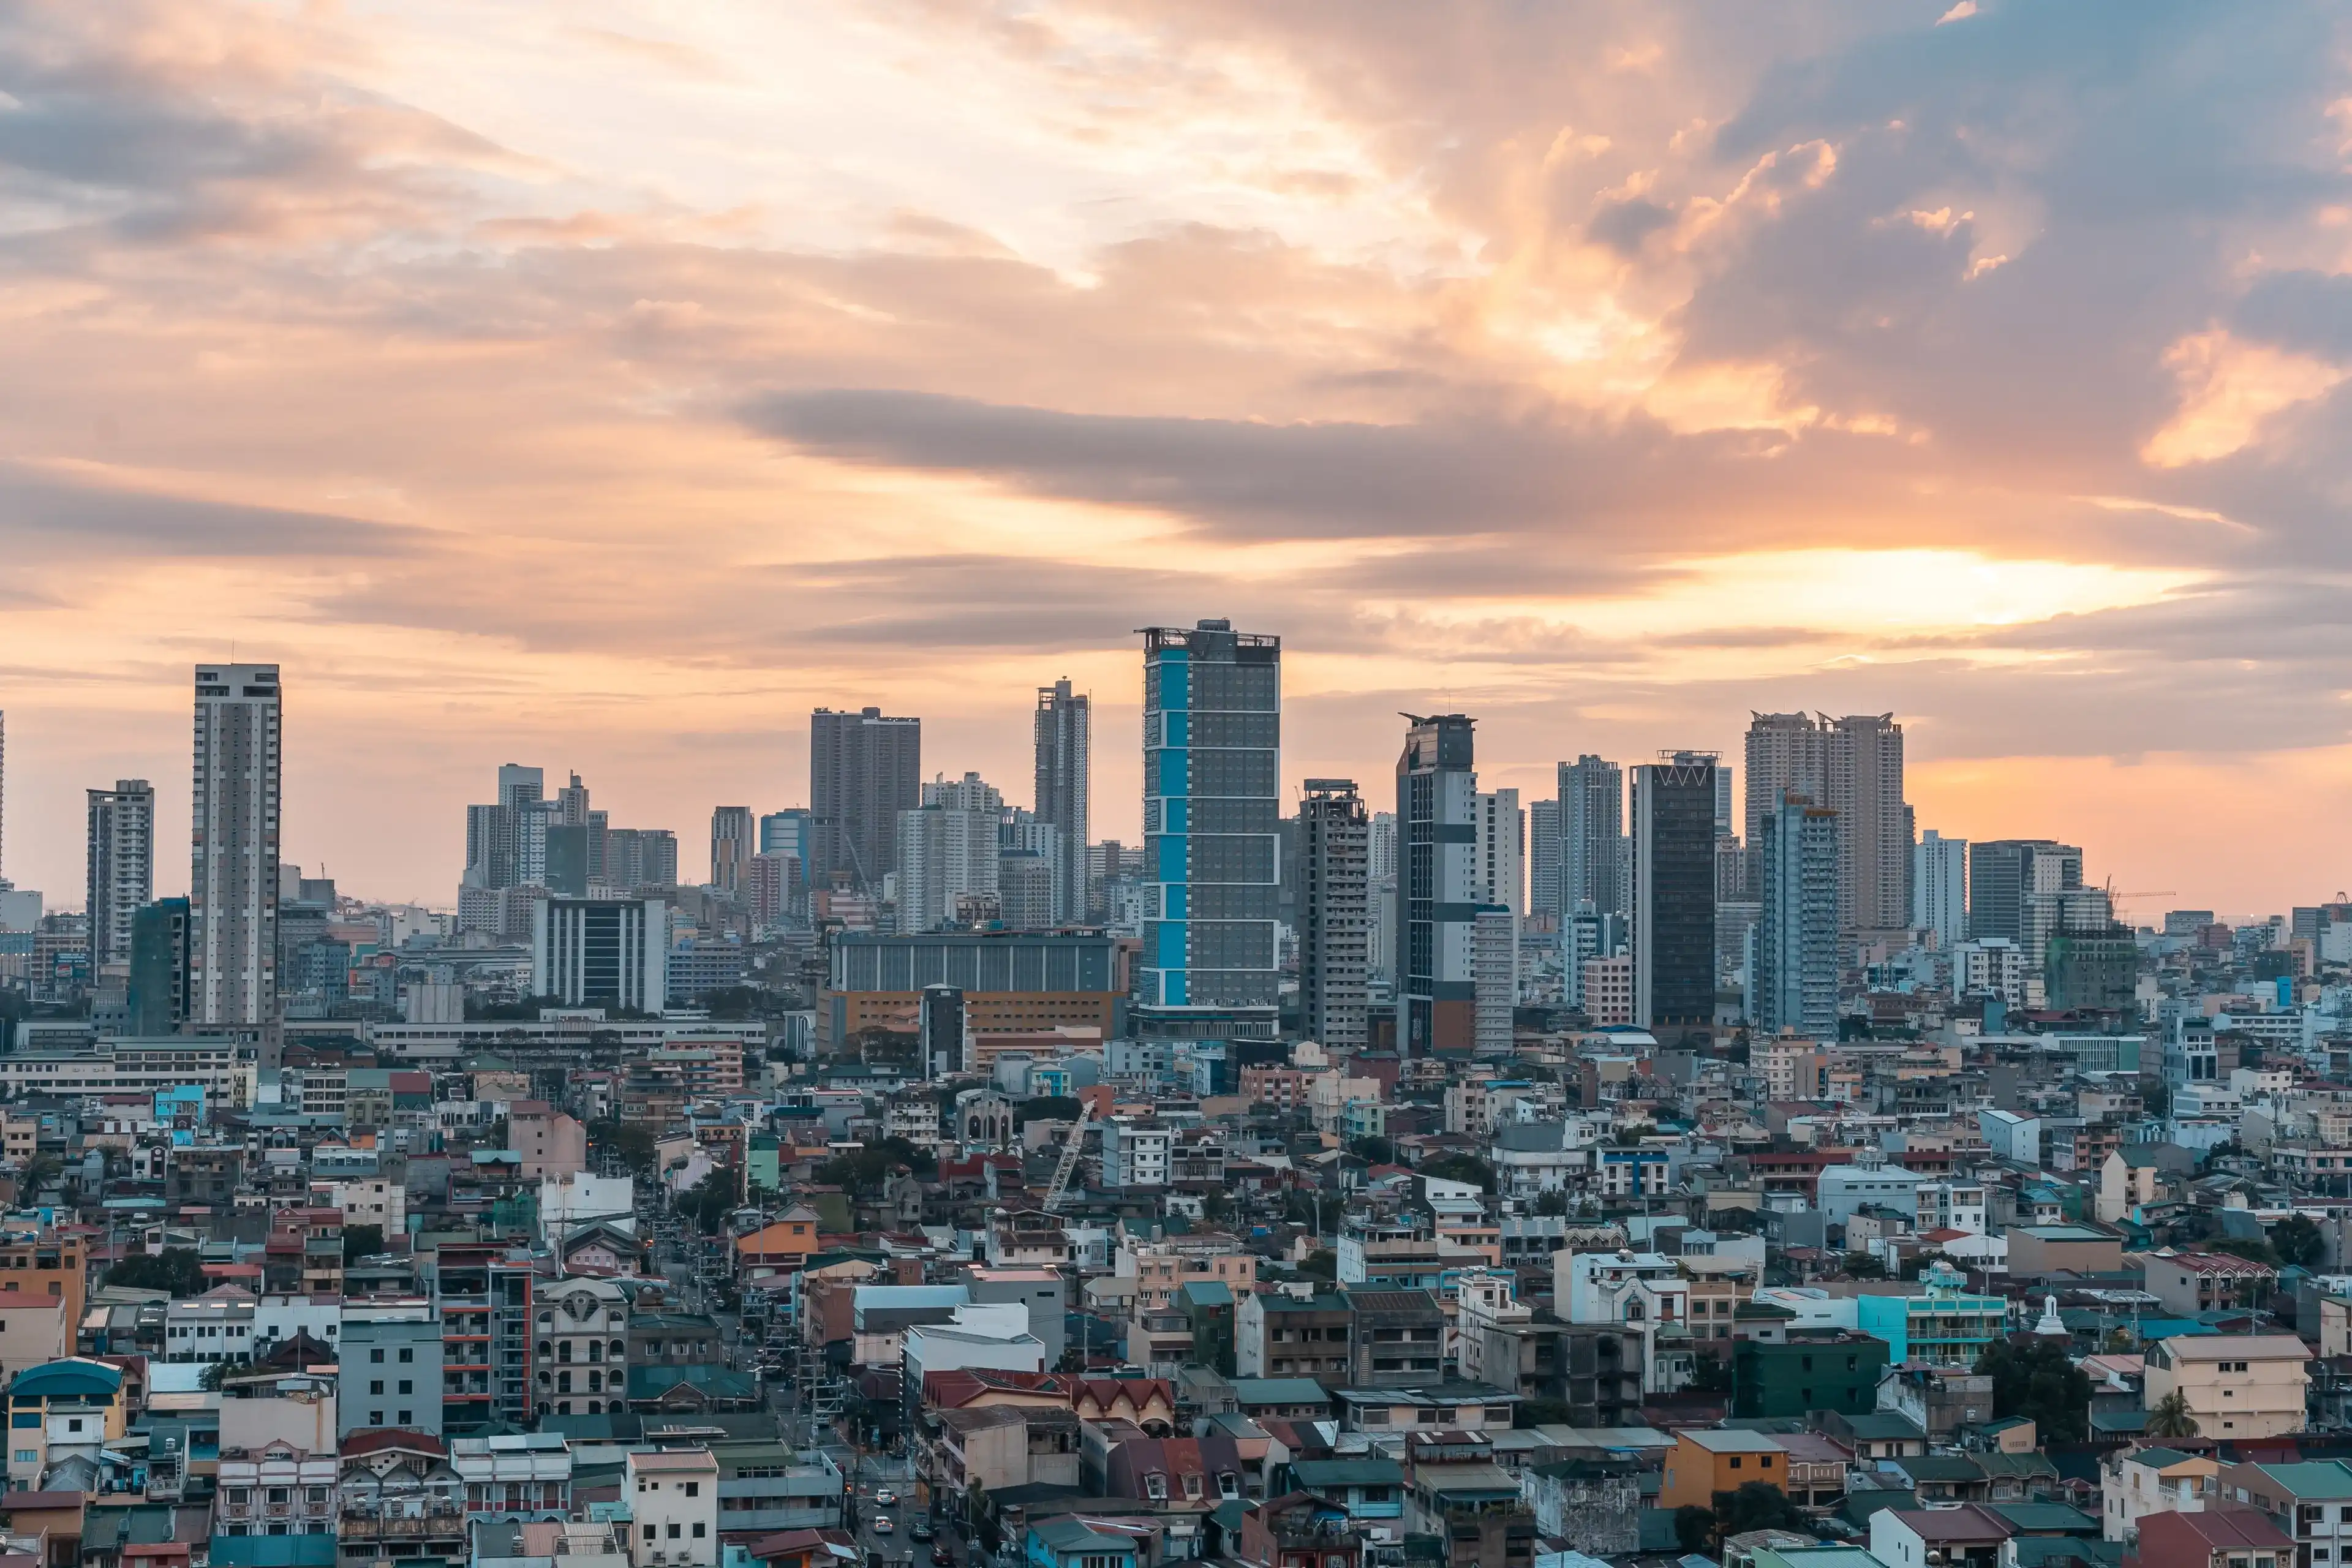 MANILA, PHILIPPINES - Jan 23, 2022: A photo of a cityscape in the Philippines, showing social class division